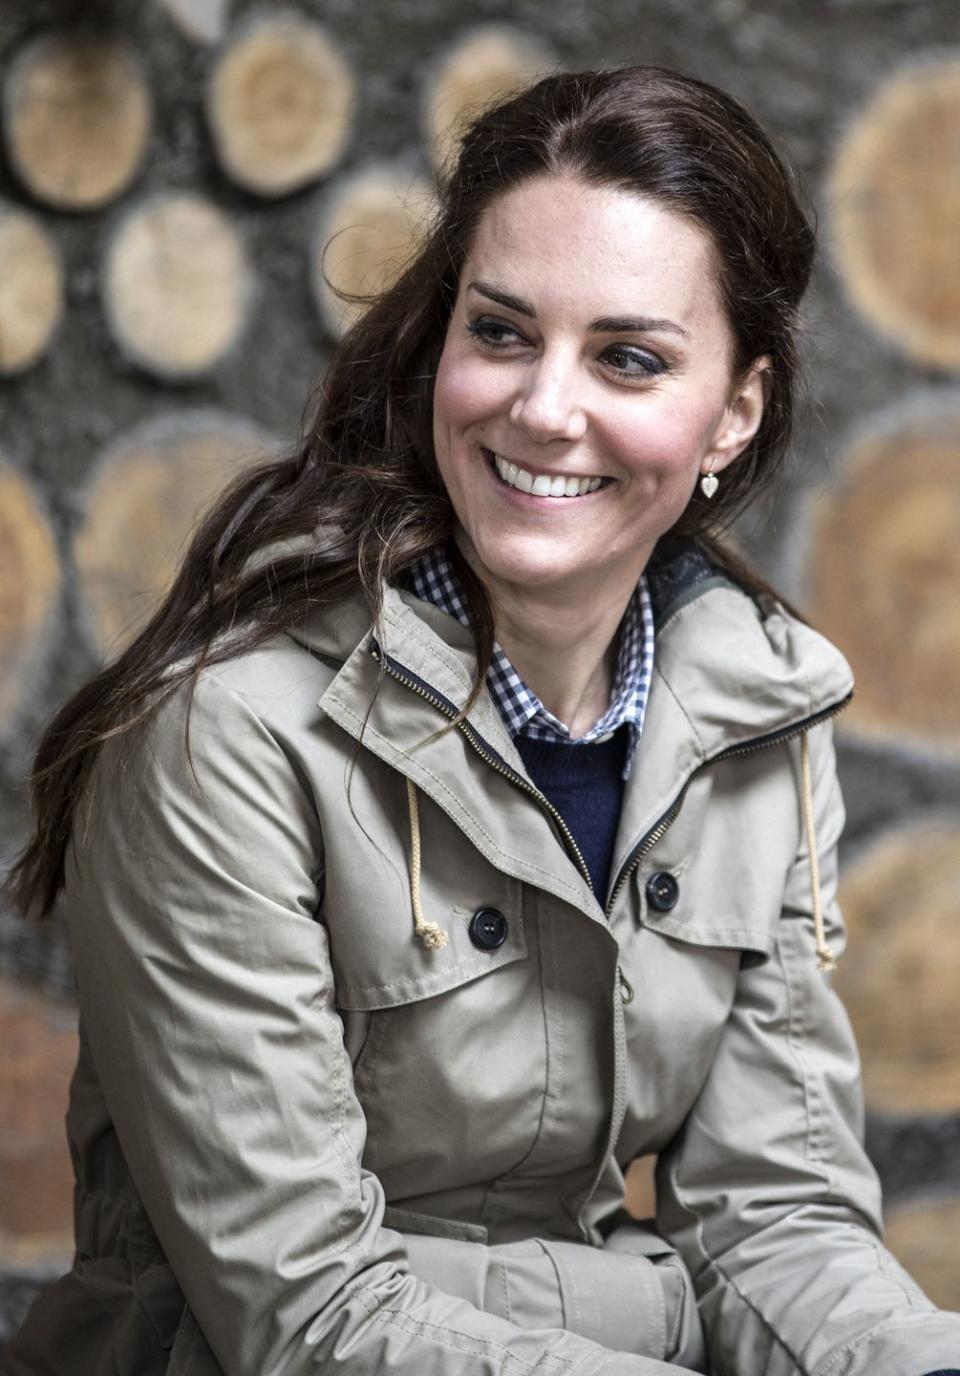 britains catherine, duchess of cambridge listens to childrens author michael morpurgo read one of his stories to children from londons vauxhall primary school during a visit to a farms for children farm in gloucestershire on may 3, 2017 photo by richard pohle pool afp photo by richard pohlepoolafp via getty images